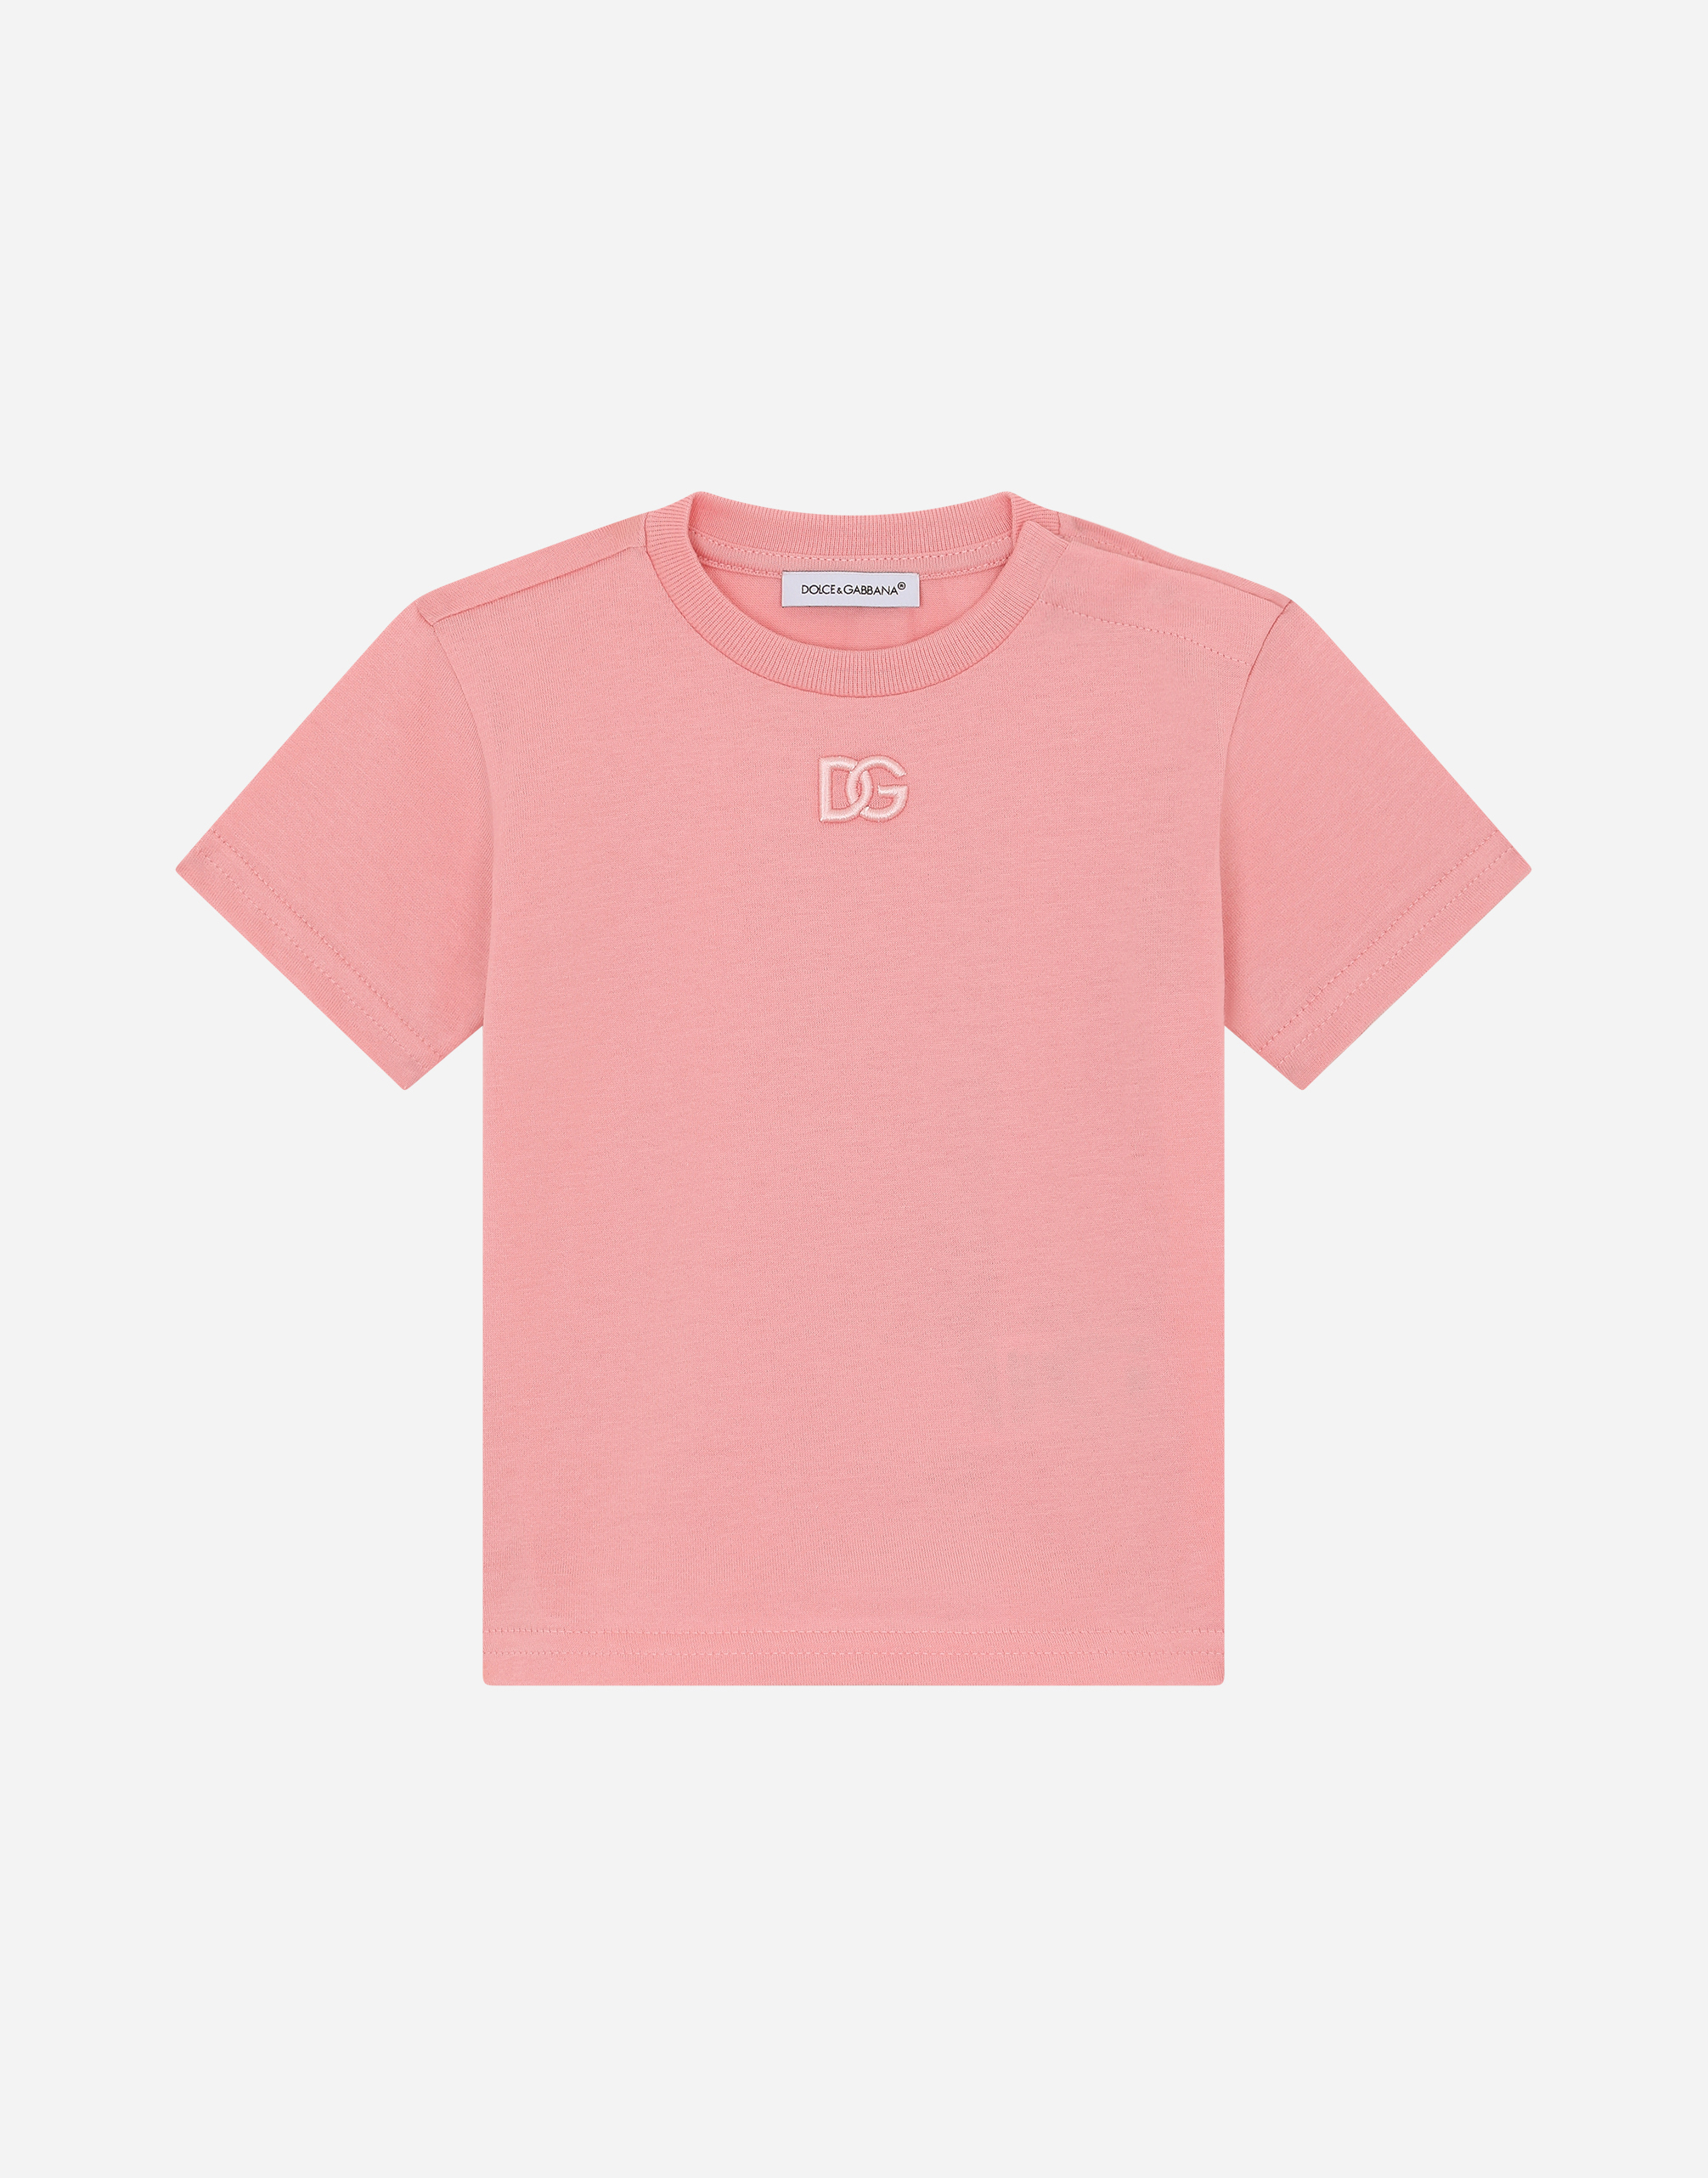 Jersey T-shirt with DG logo embroidery in Pink